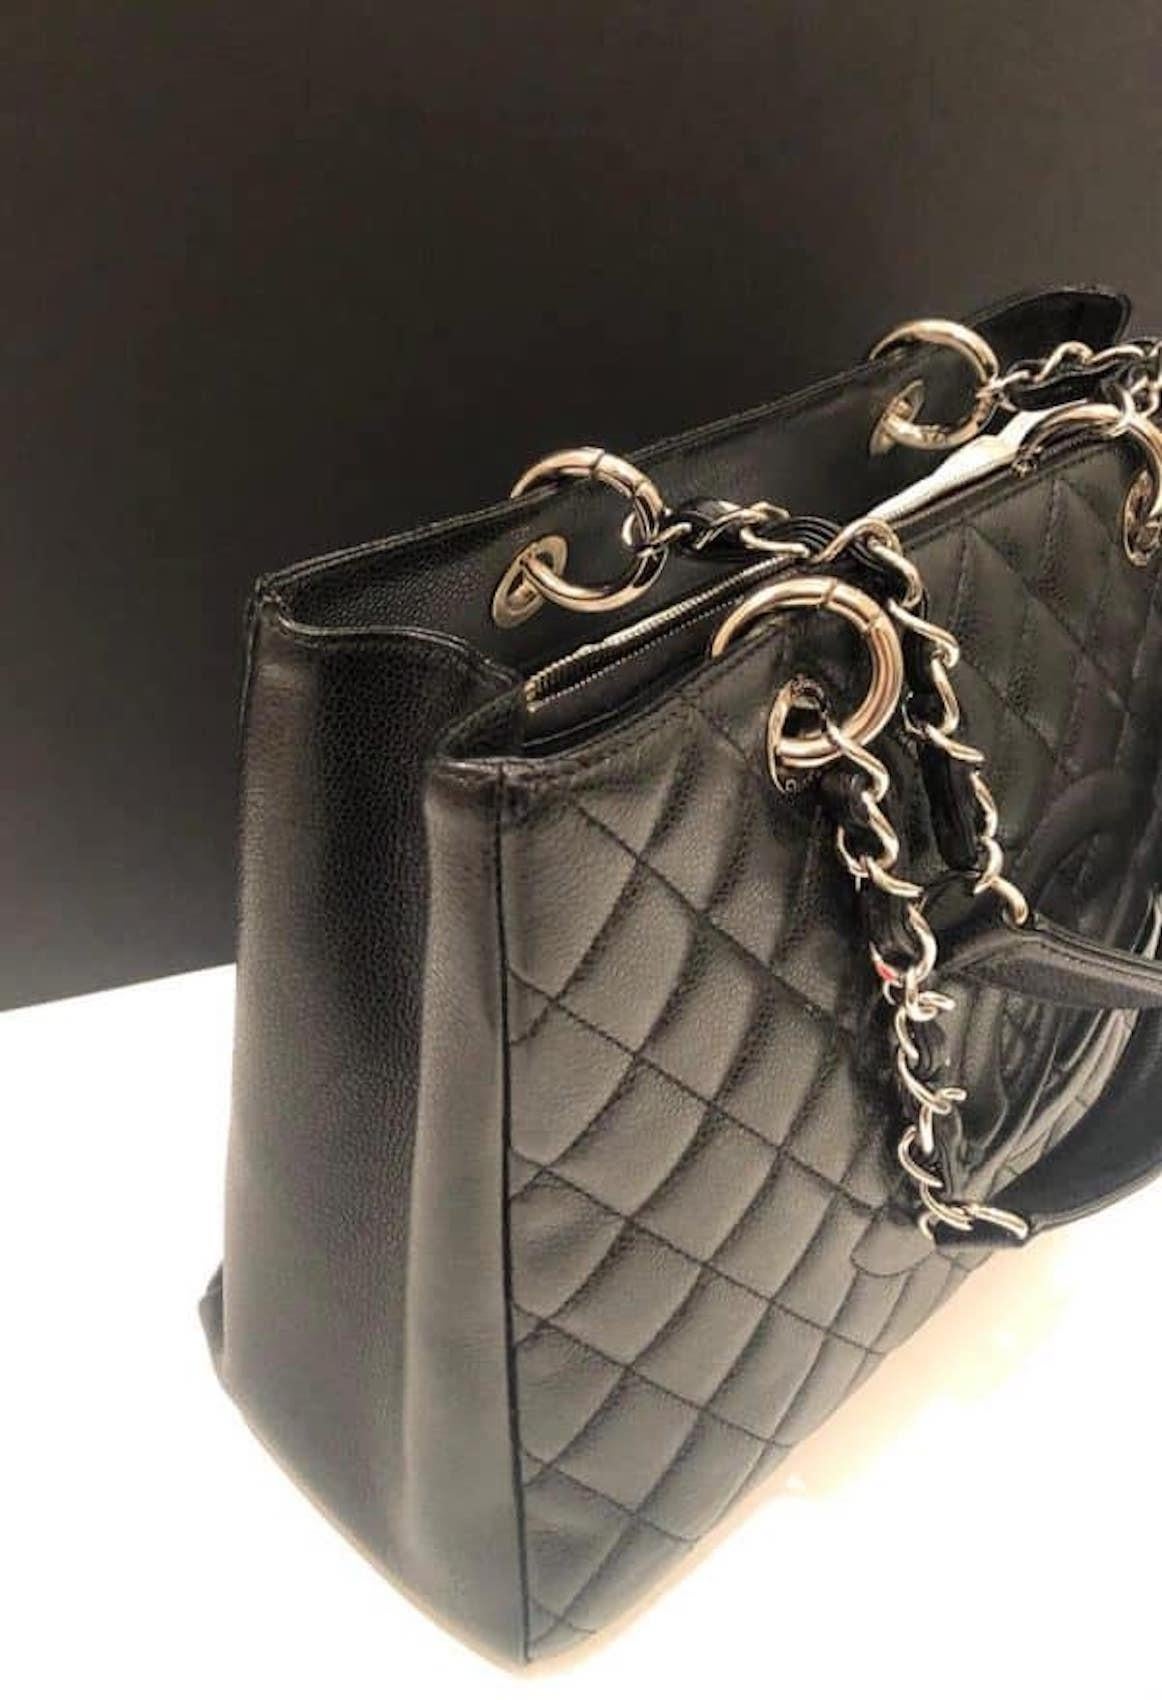 leather chanel tote bag